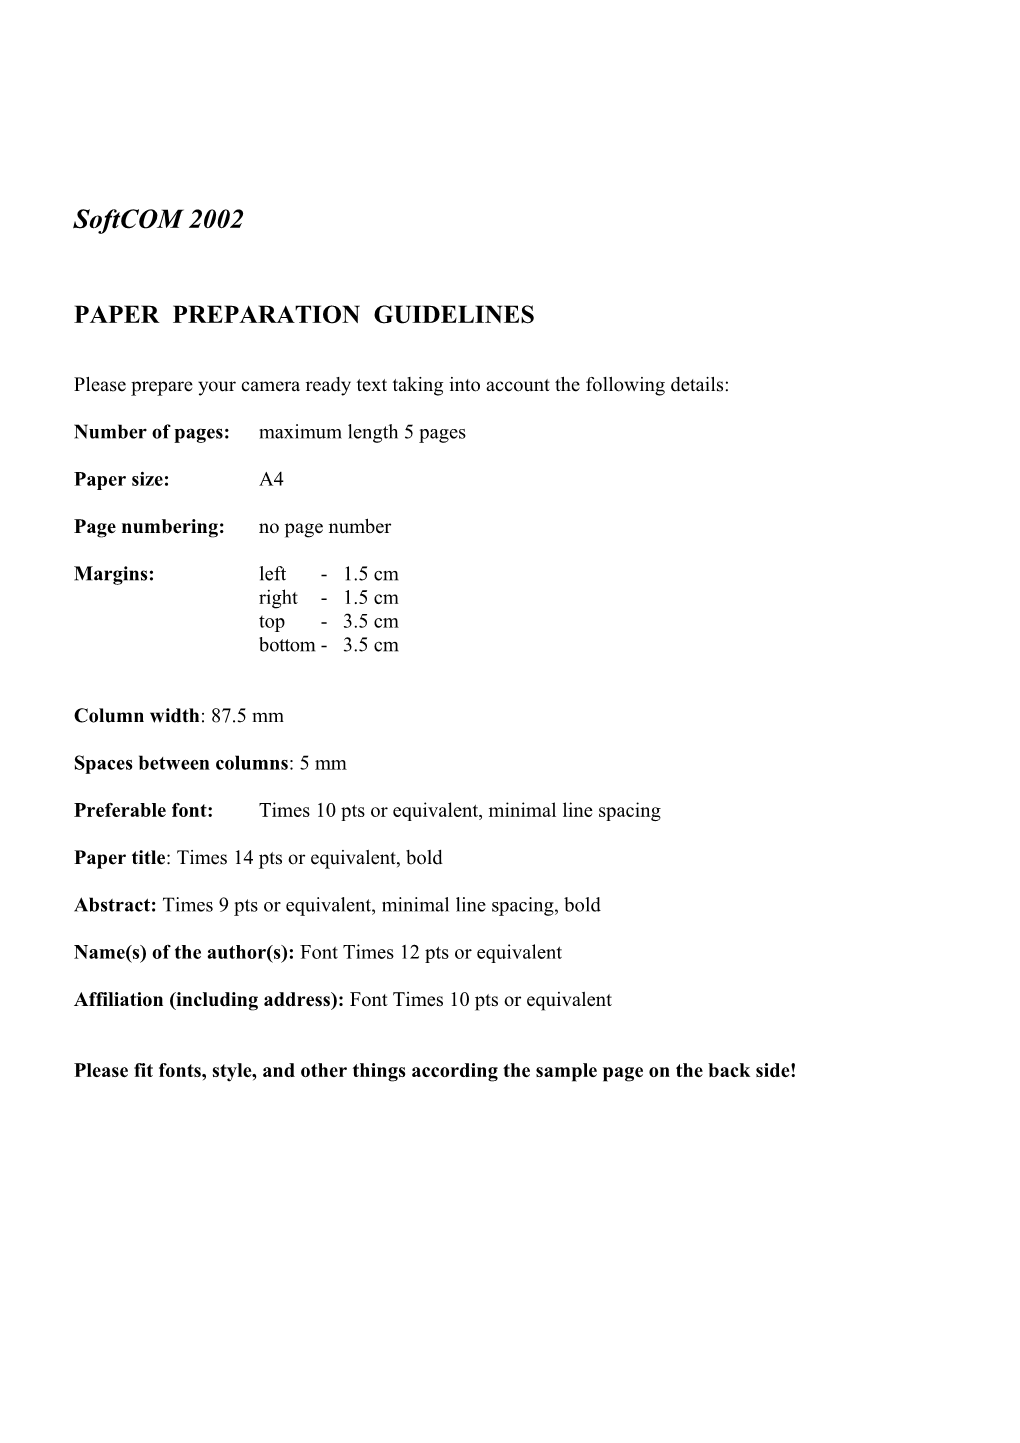 Paper Preparation Guidelines